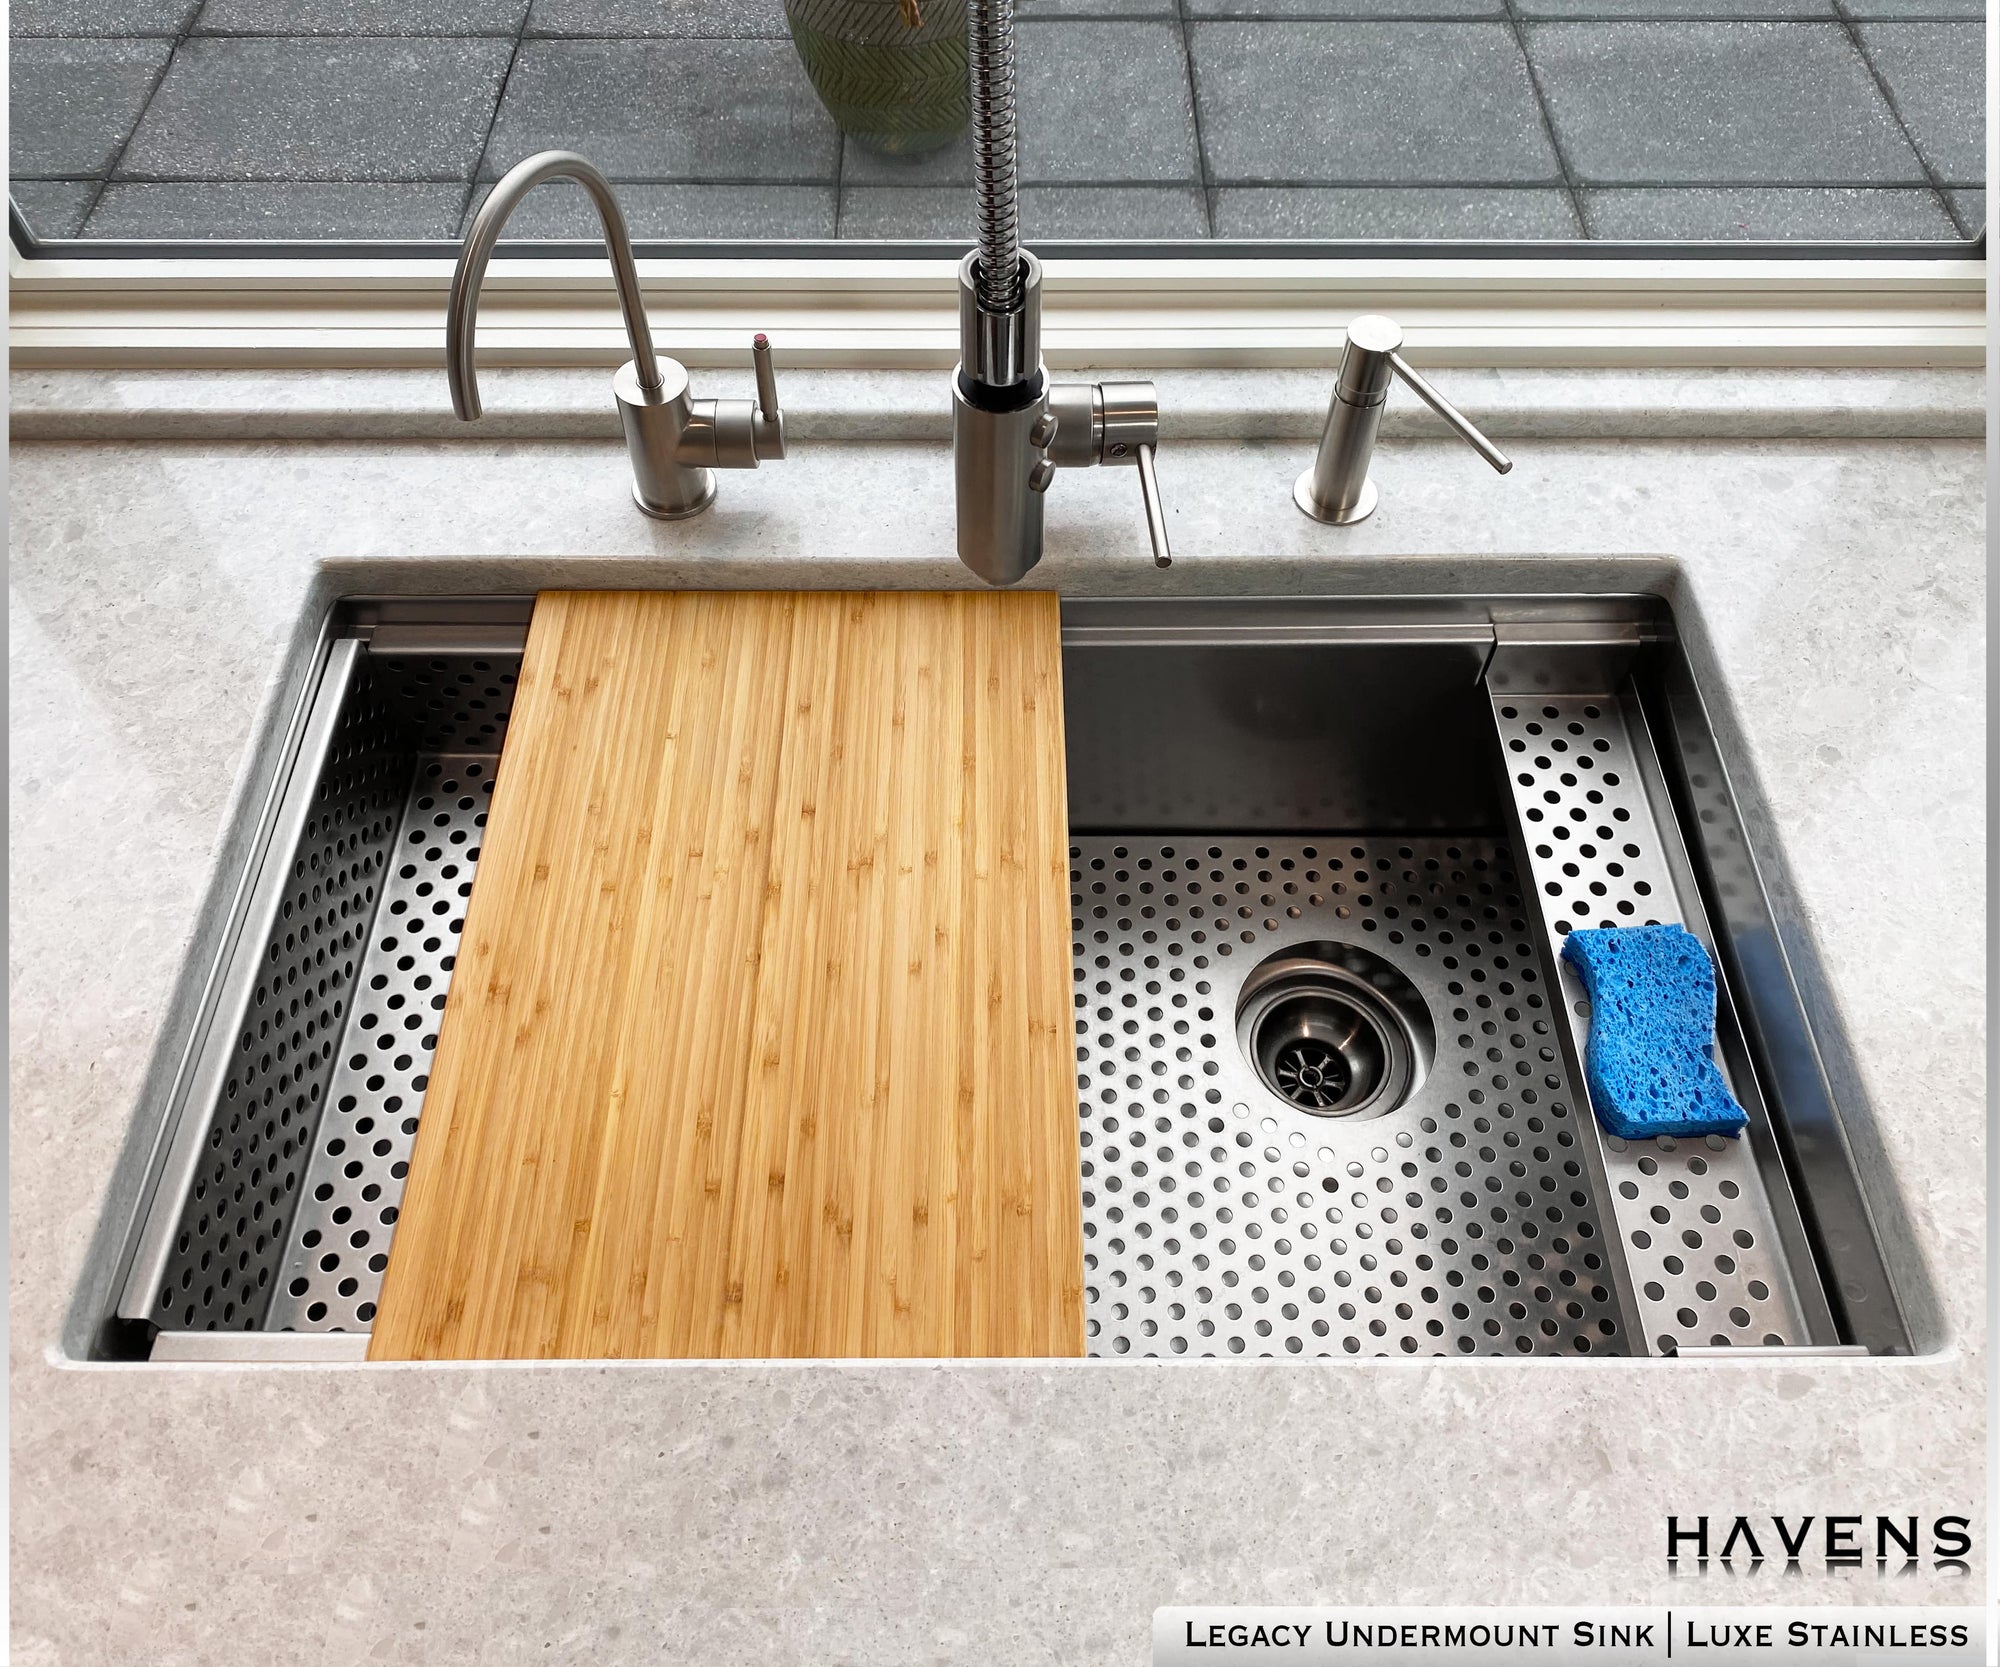 Stainless Steel Sink Basin Grate